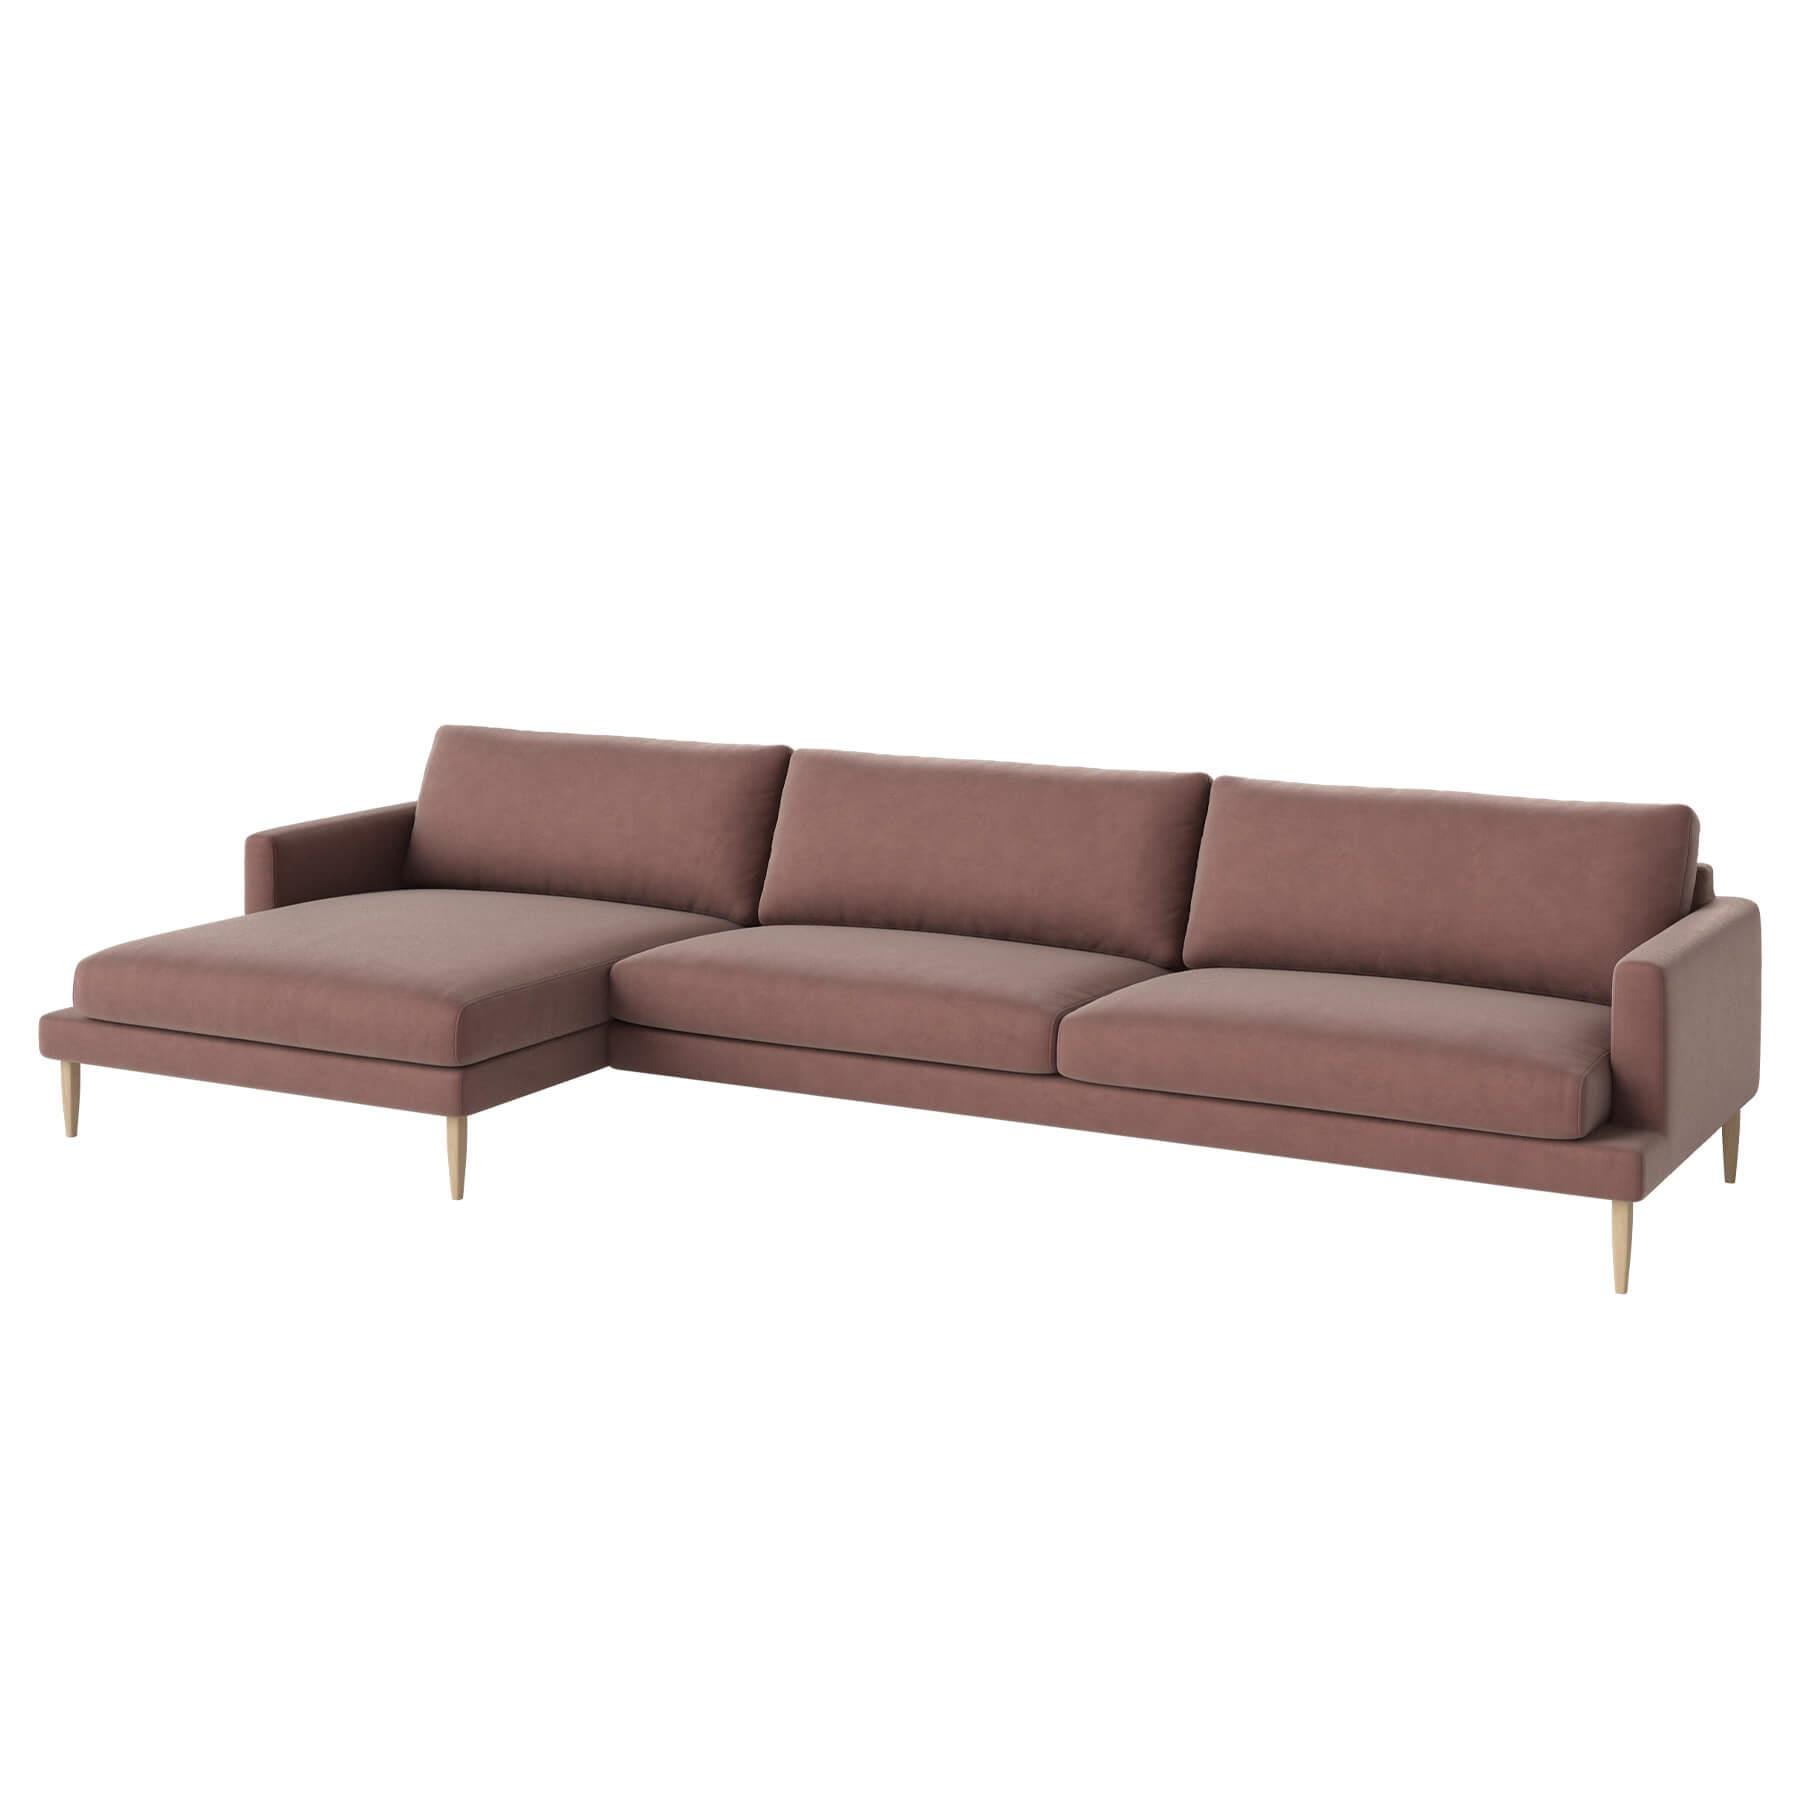 Bolia Veneda Sofa 45 Seater Sofa With Chaise Longue White Oiled Oak Ritz Light Rosa Left Pink Designer Furniture From Holloways Of Ludlow